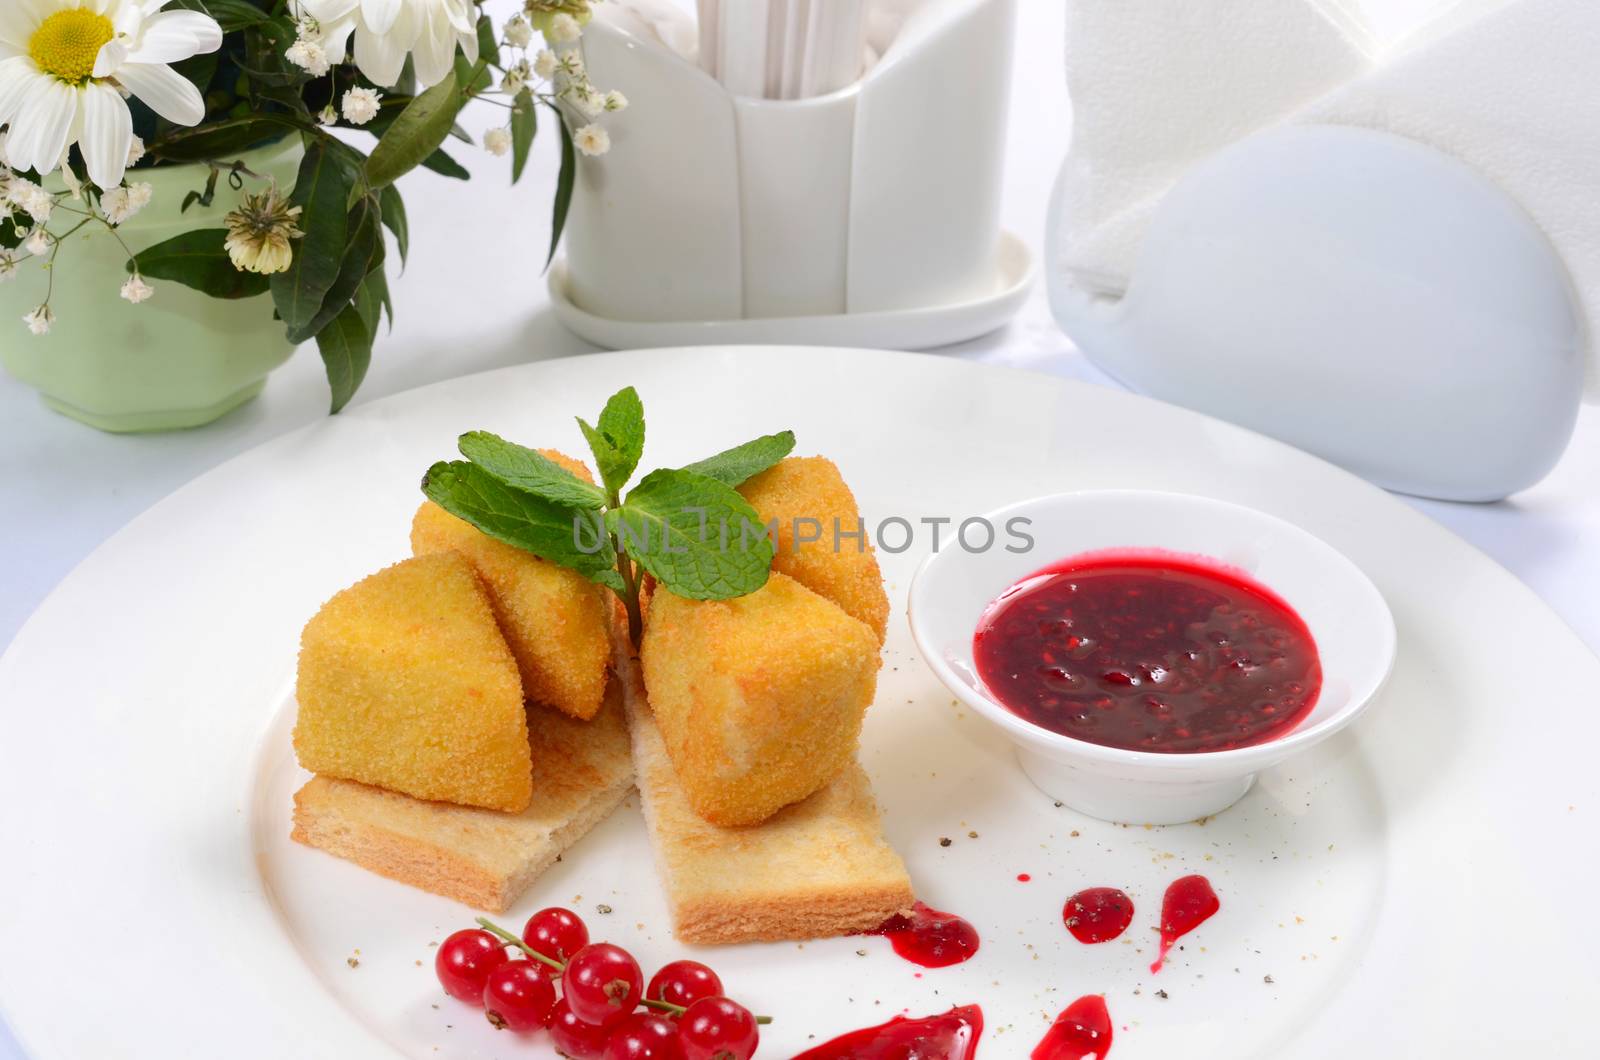 Cheese in breadcrumbs with currant jam by SvetaVo